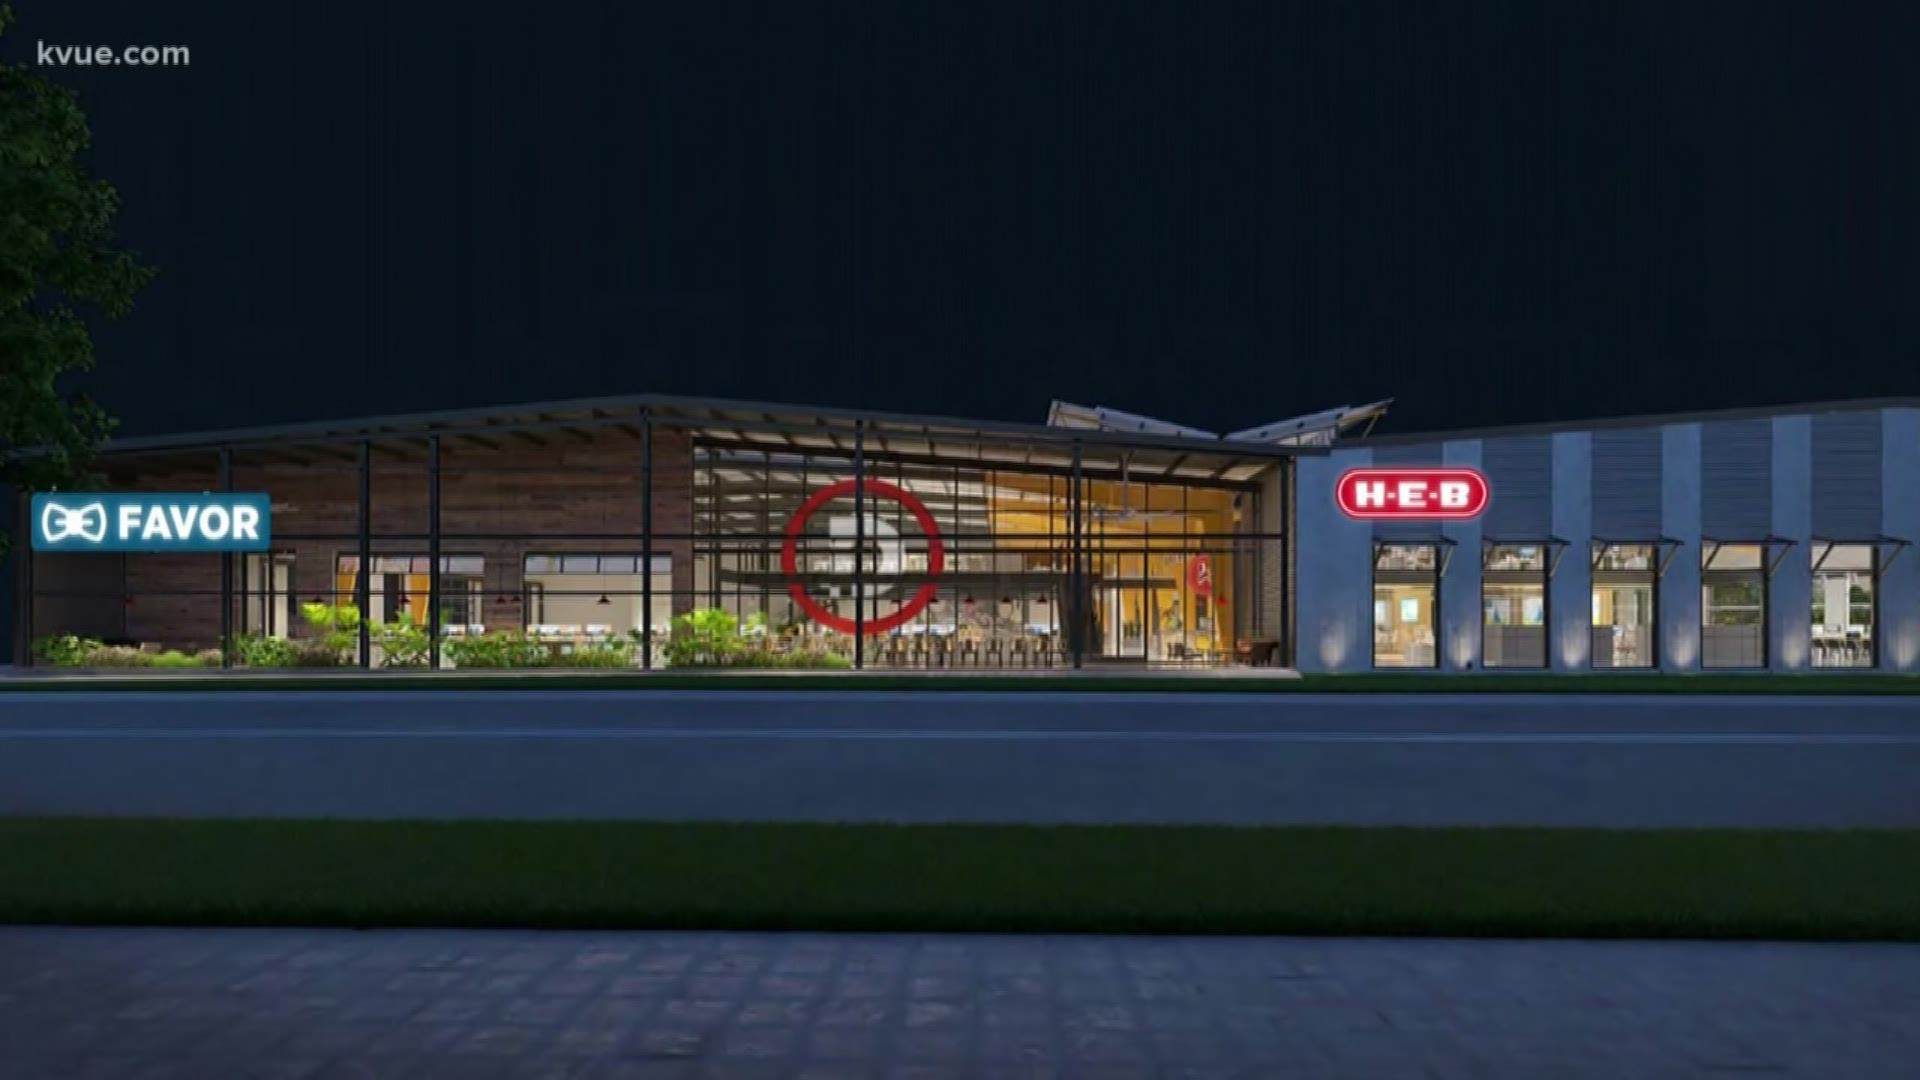 H-E-B is renovating an industrial warehouse into a creative workspace for their partners and employees set to be completed in Spring 2018 in East Austin.